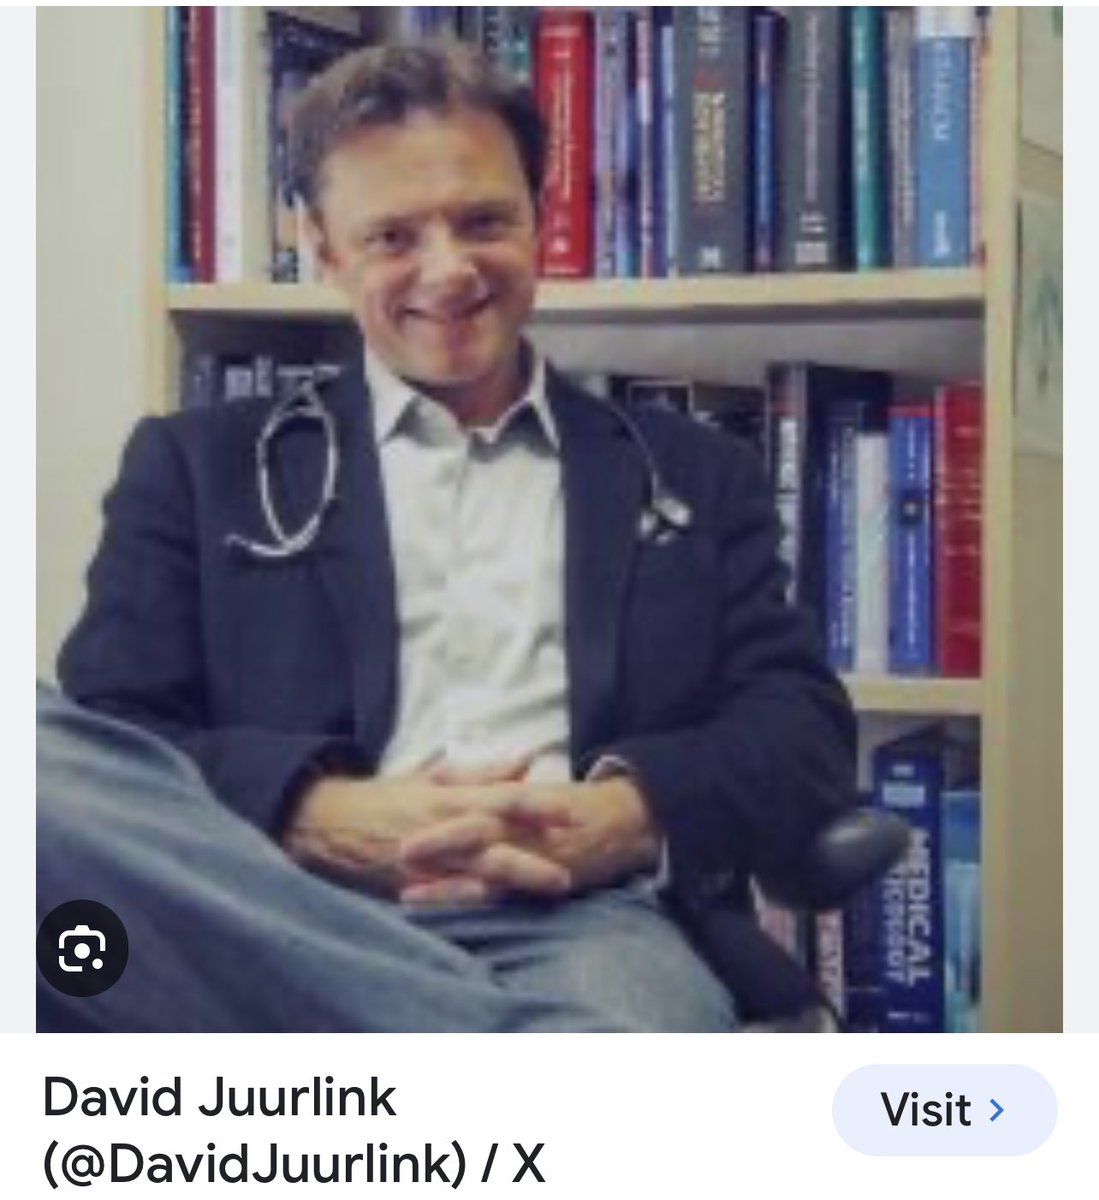 Meet a few of the doctors of @supportprop Mark Sullivan, Jane Ballantyne, Andrew Kolodny, David Juurlink These monsters are responsible for pain patient suicides We want prison time for the doctors of @supportprop